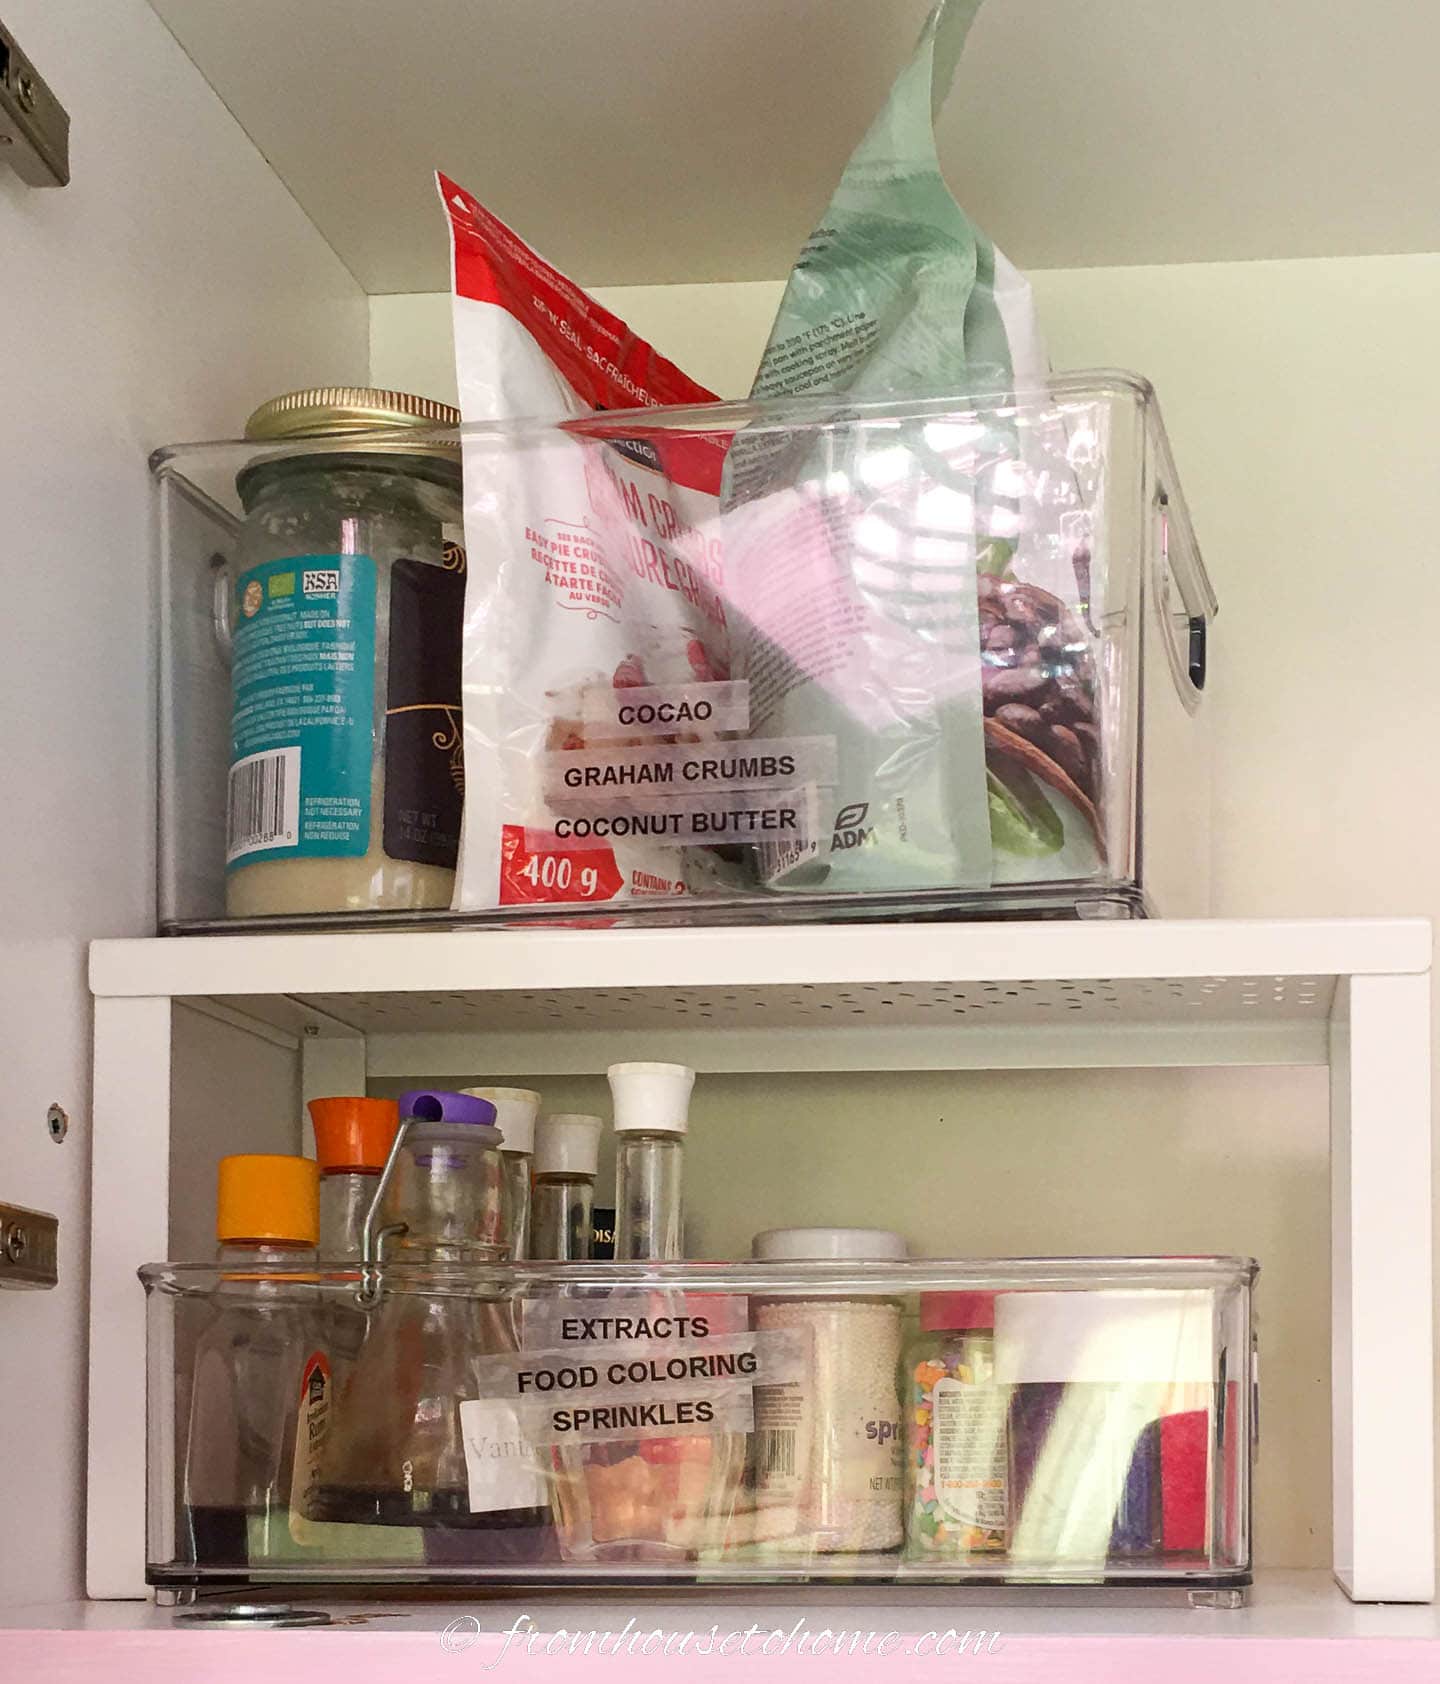 Kitchen cabinet storing baking supplies in plastic containers on racks